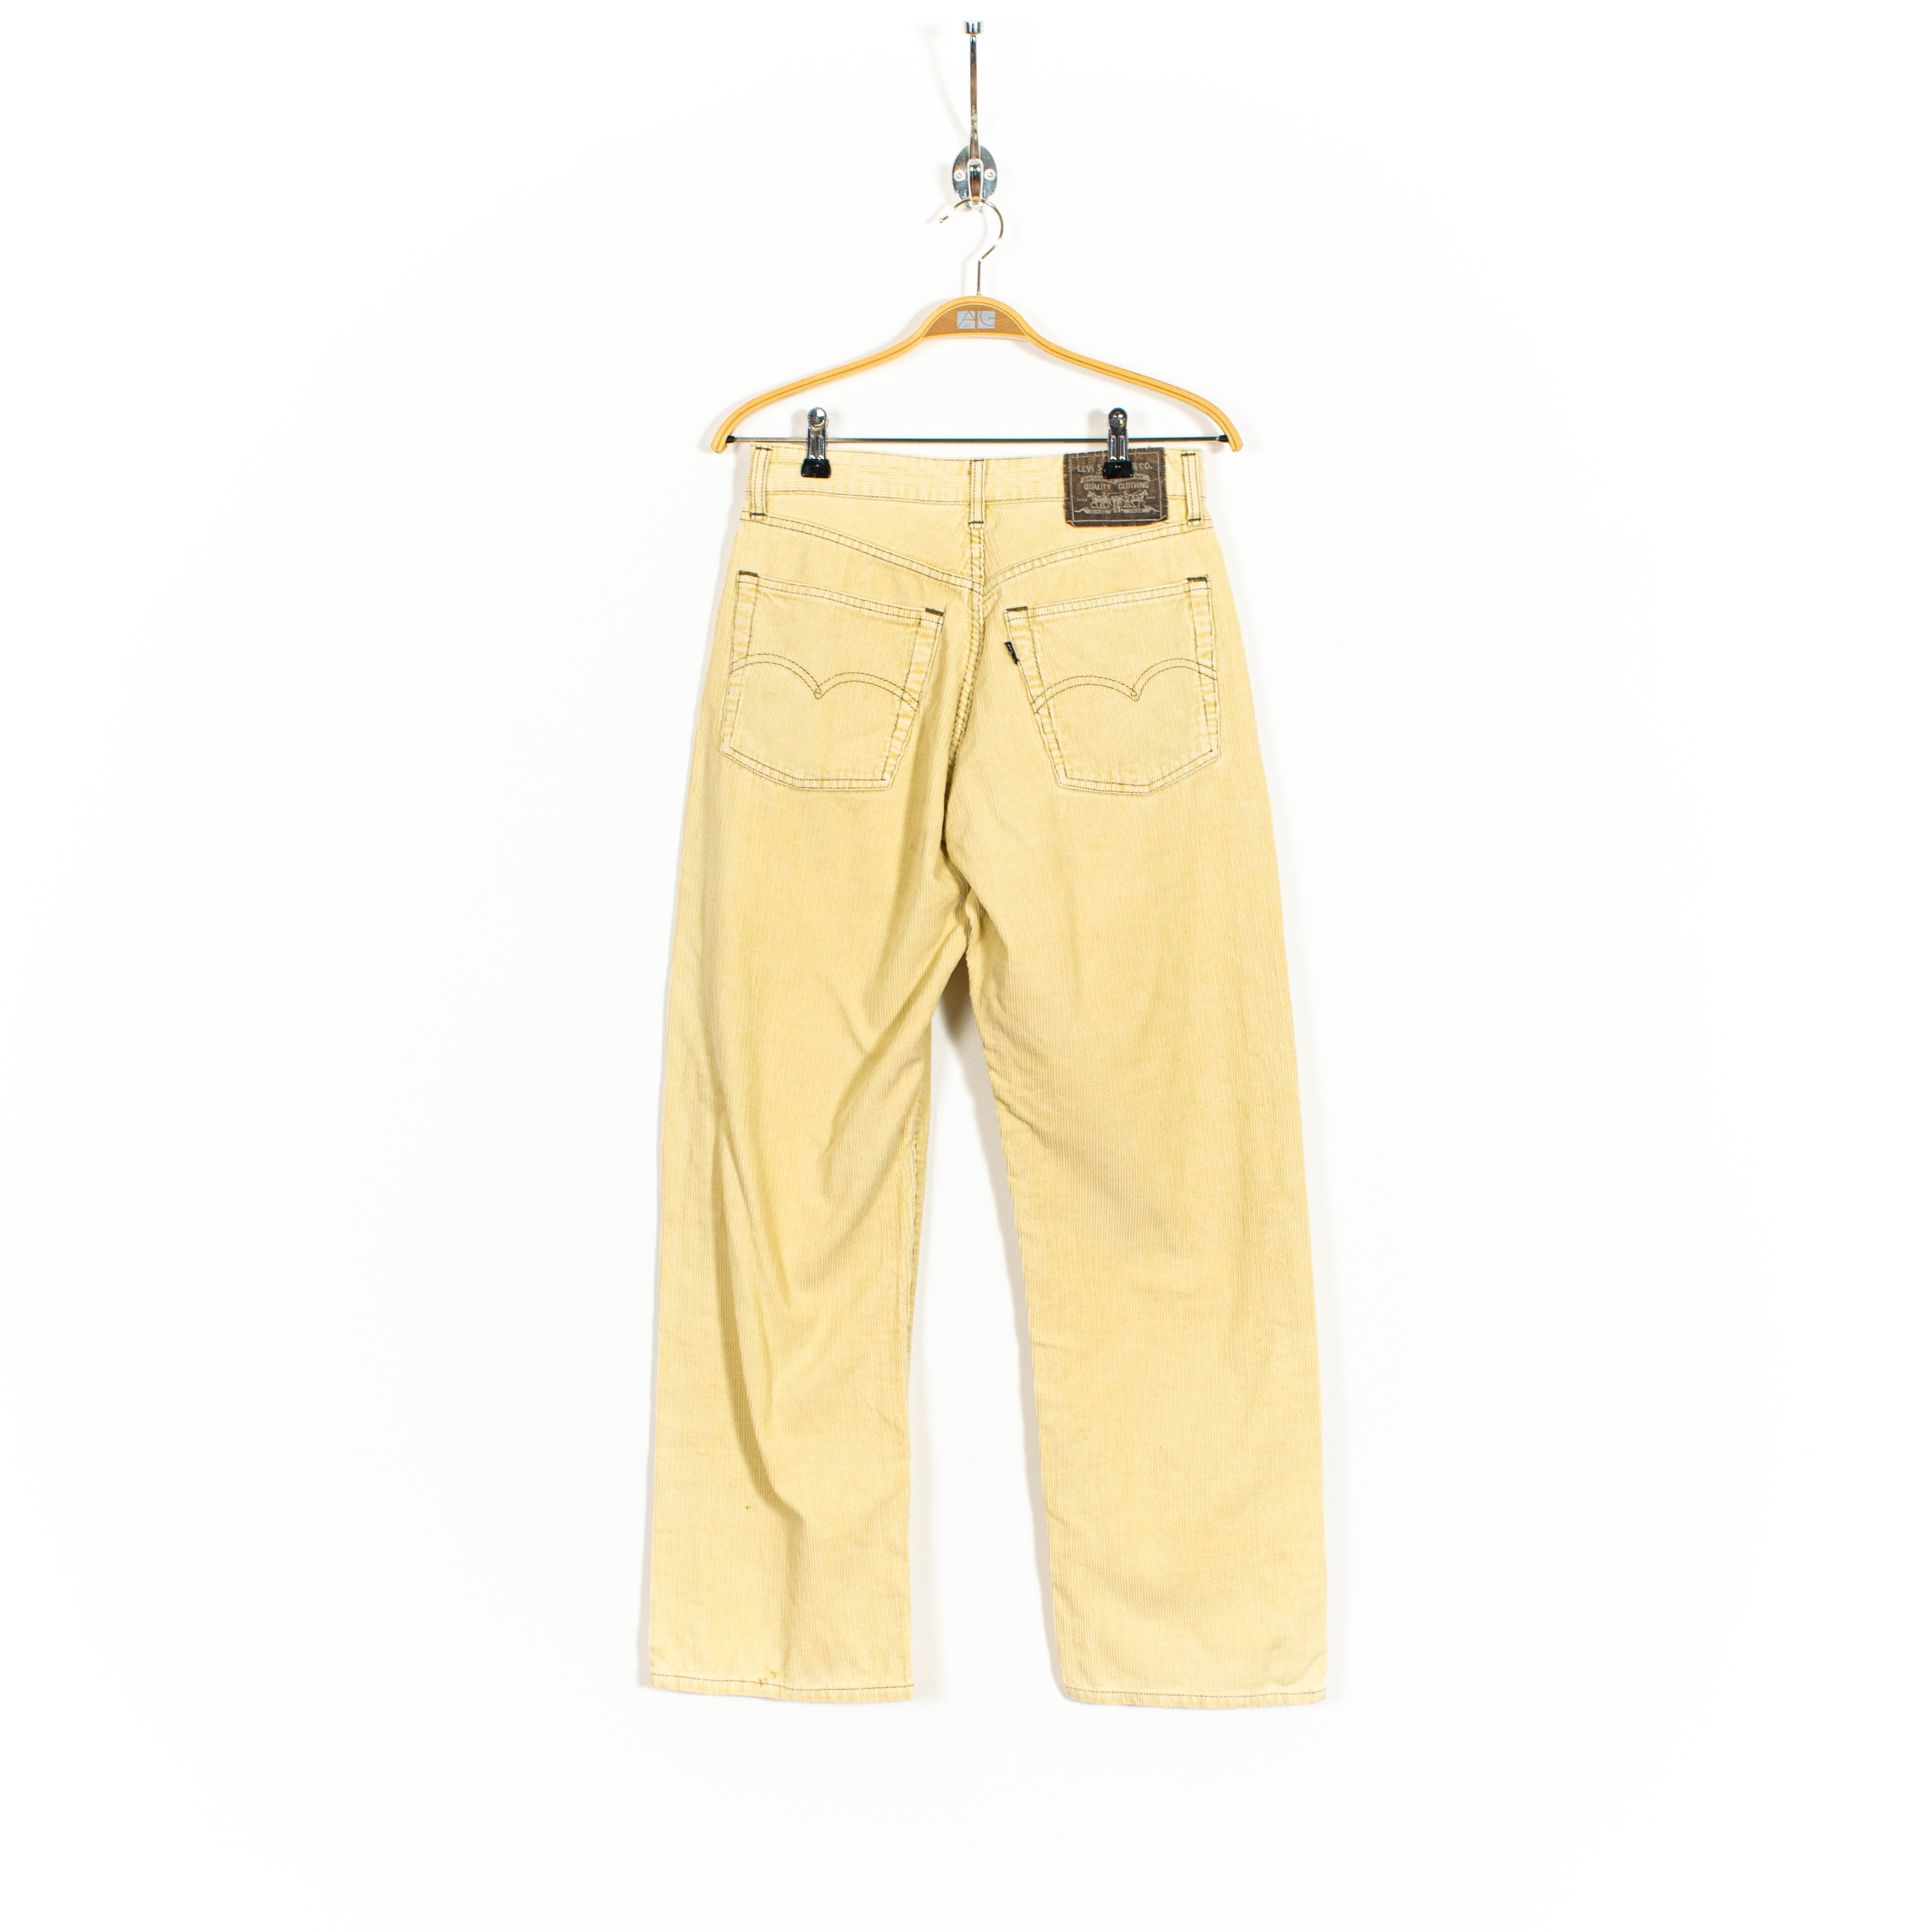 Vintage Levis Pastel Yellow Button Fly Straight Fit Pants Mens US29